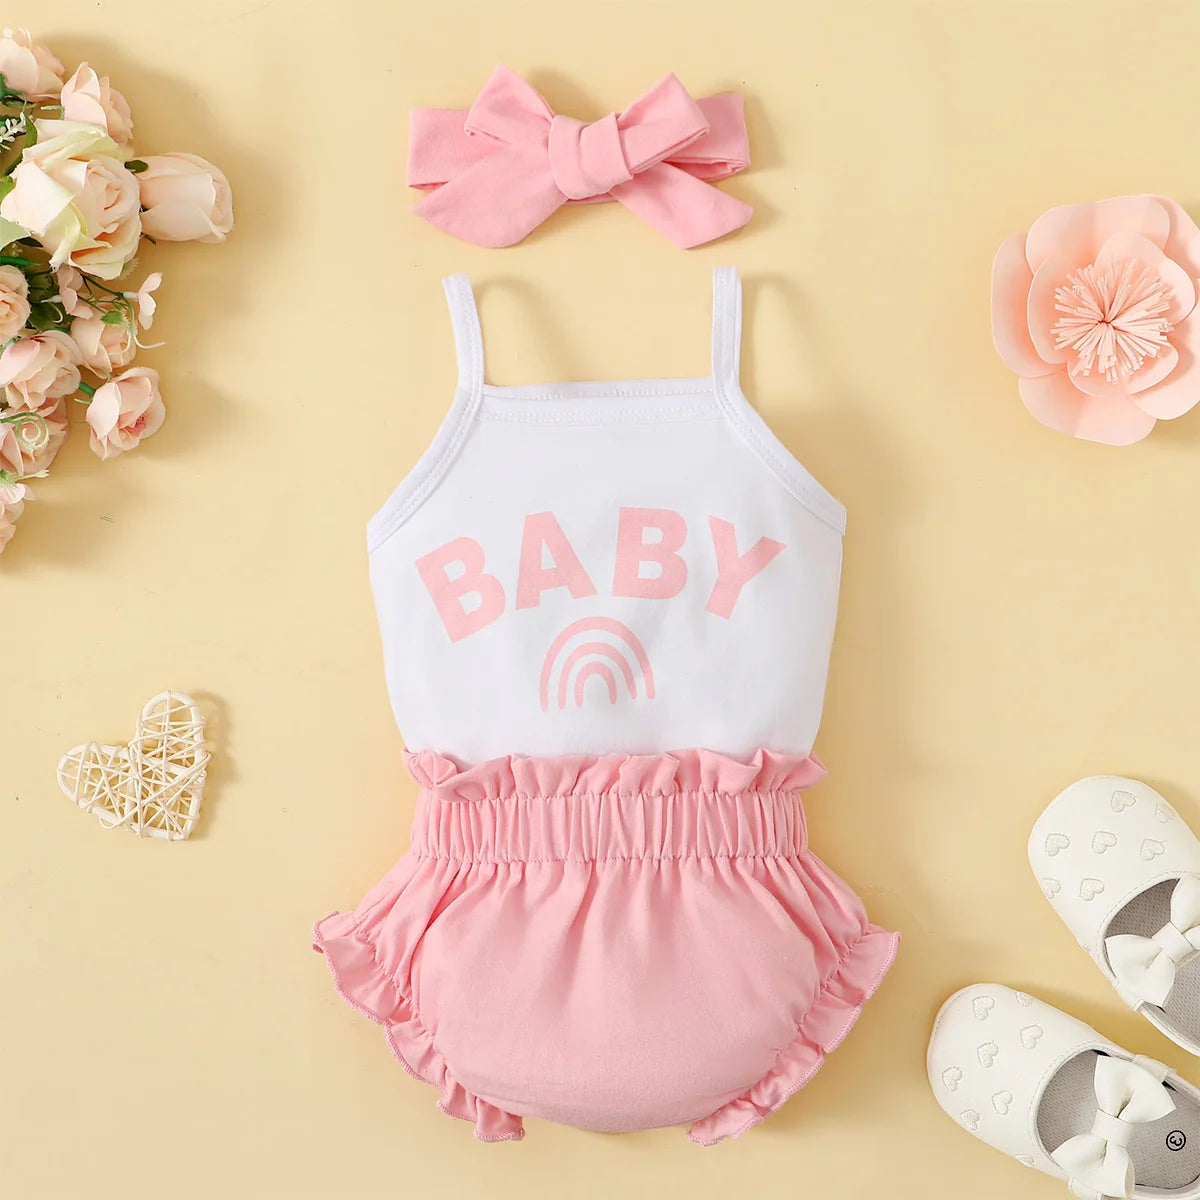 Baby girl pink shorts cute suit